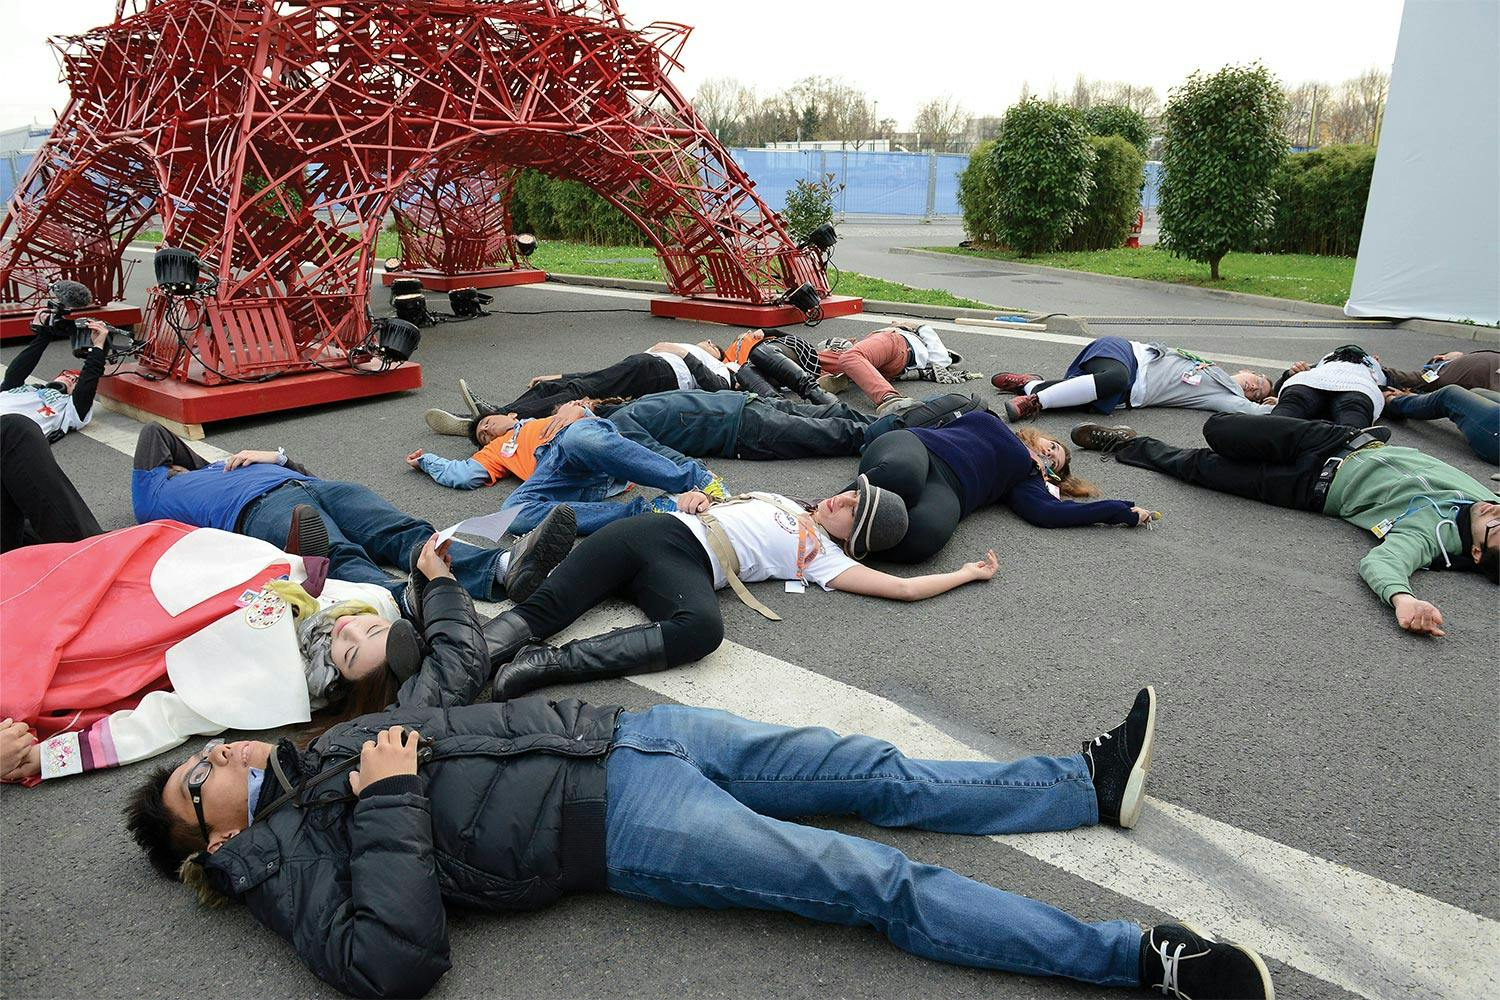 A group of youth lie on the pavement next to a large sculpture of the Eiffel Tower made of red folding chairs.